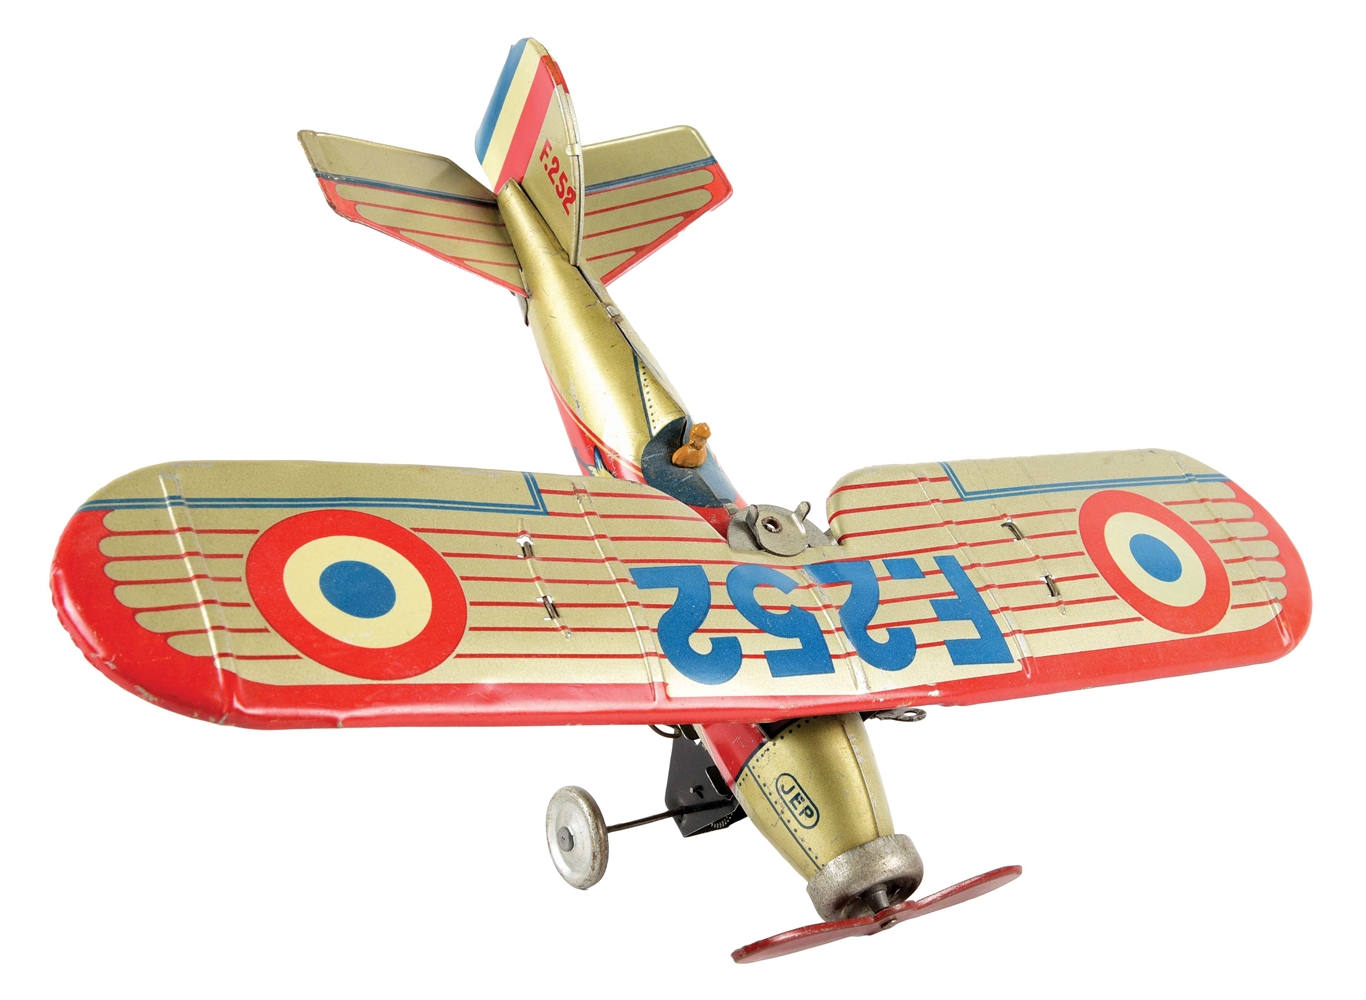 PRE-WAR FRENCH TIN LITHO WIND-UP JAP SINGLE WINGED AIRPLANE MARKED "F. 252".